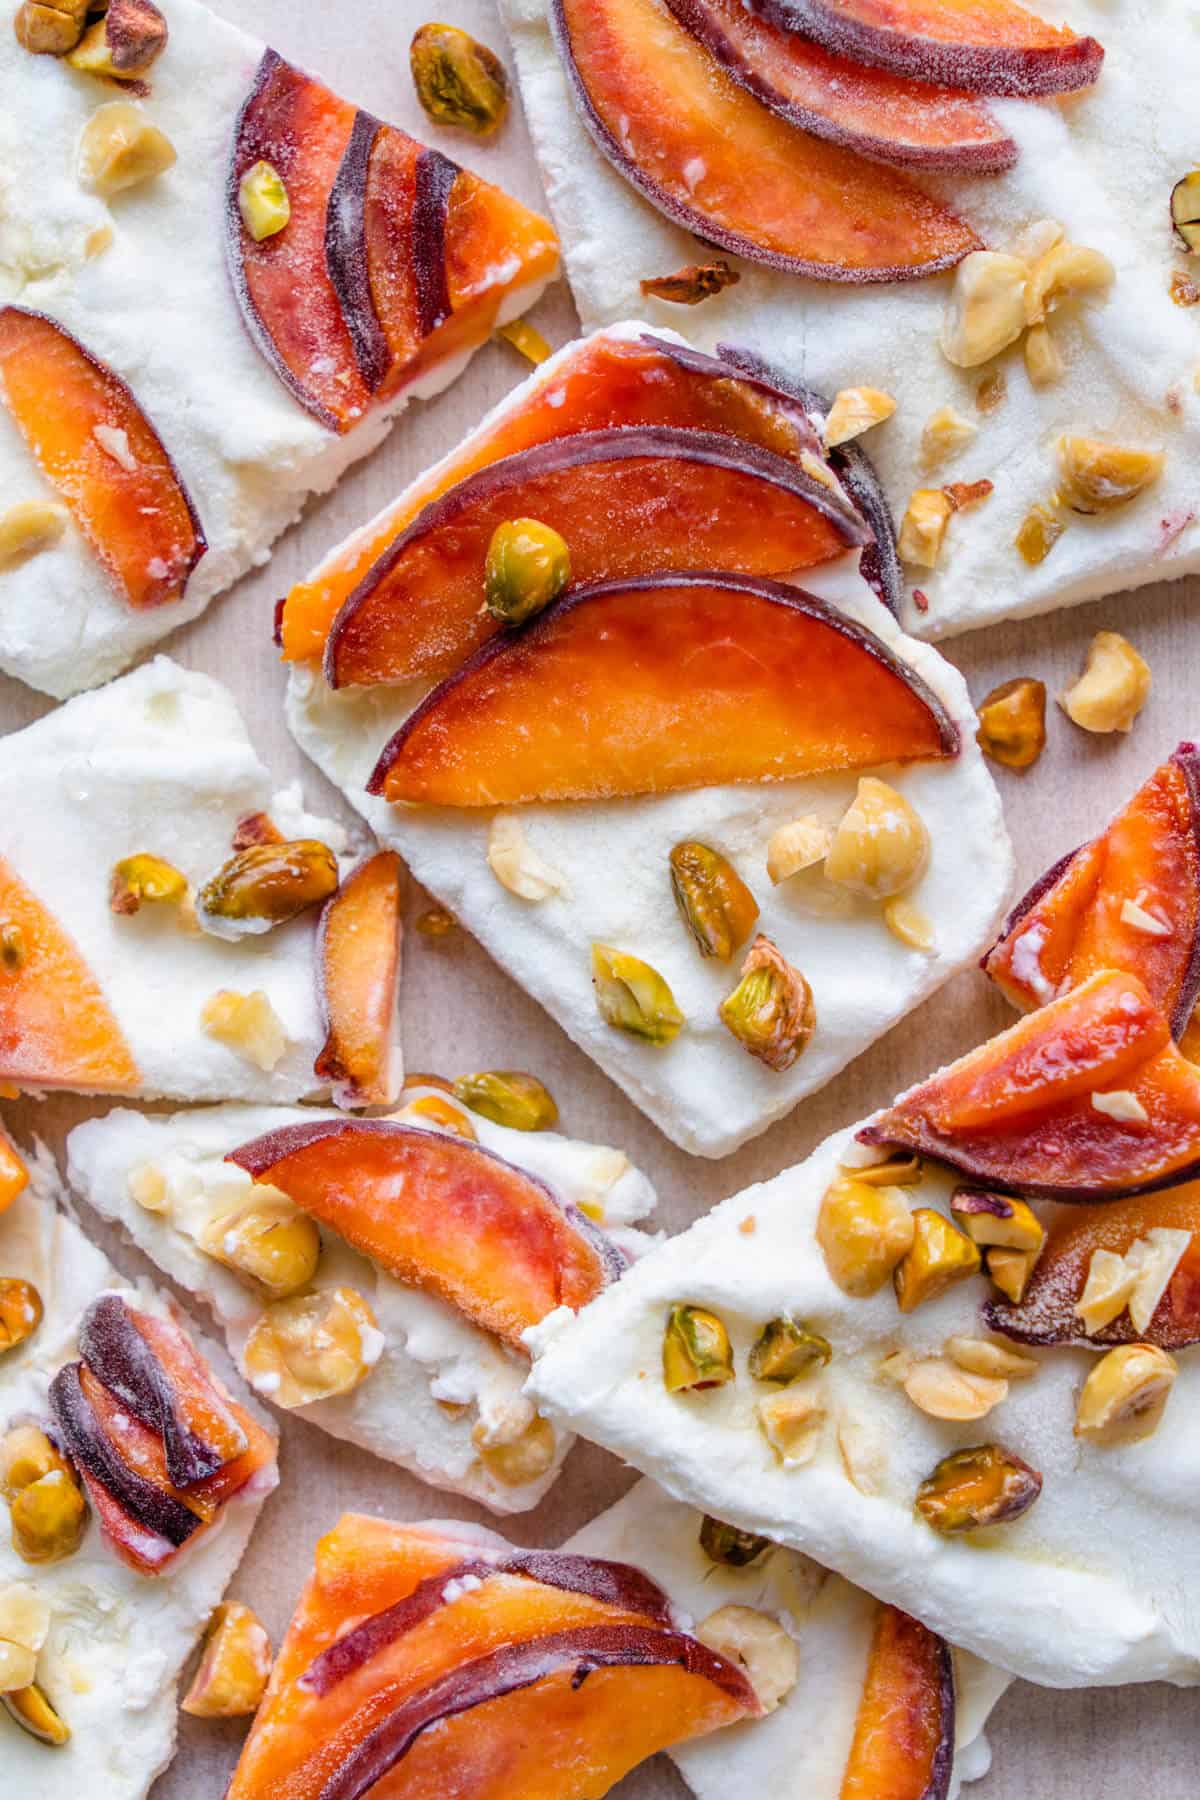 Frozen yogurt bark with peach and nuts